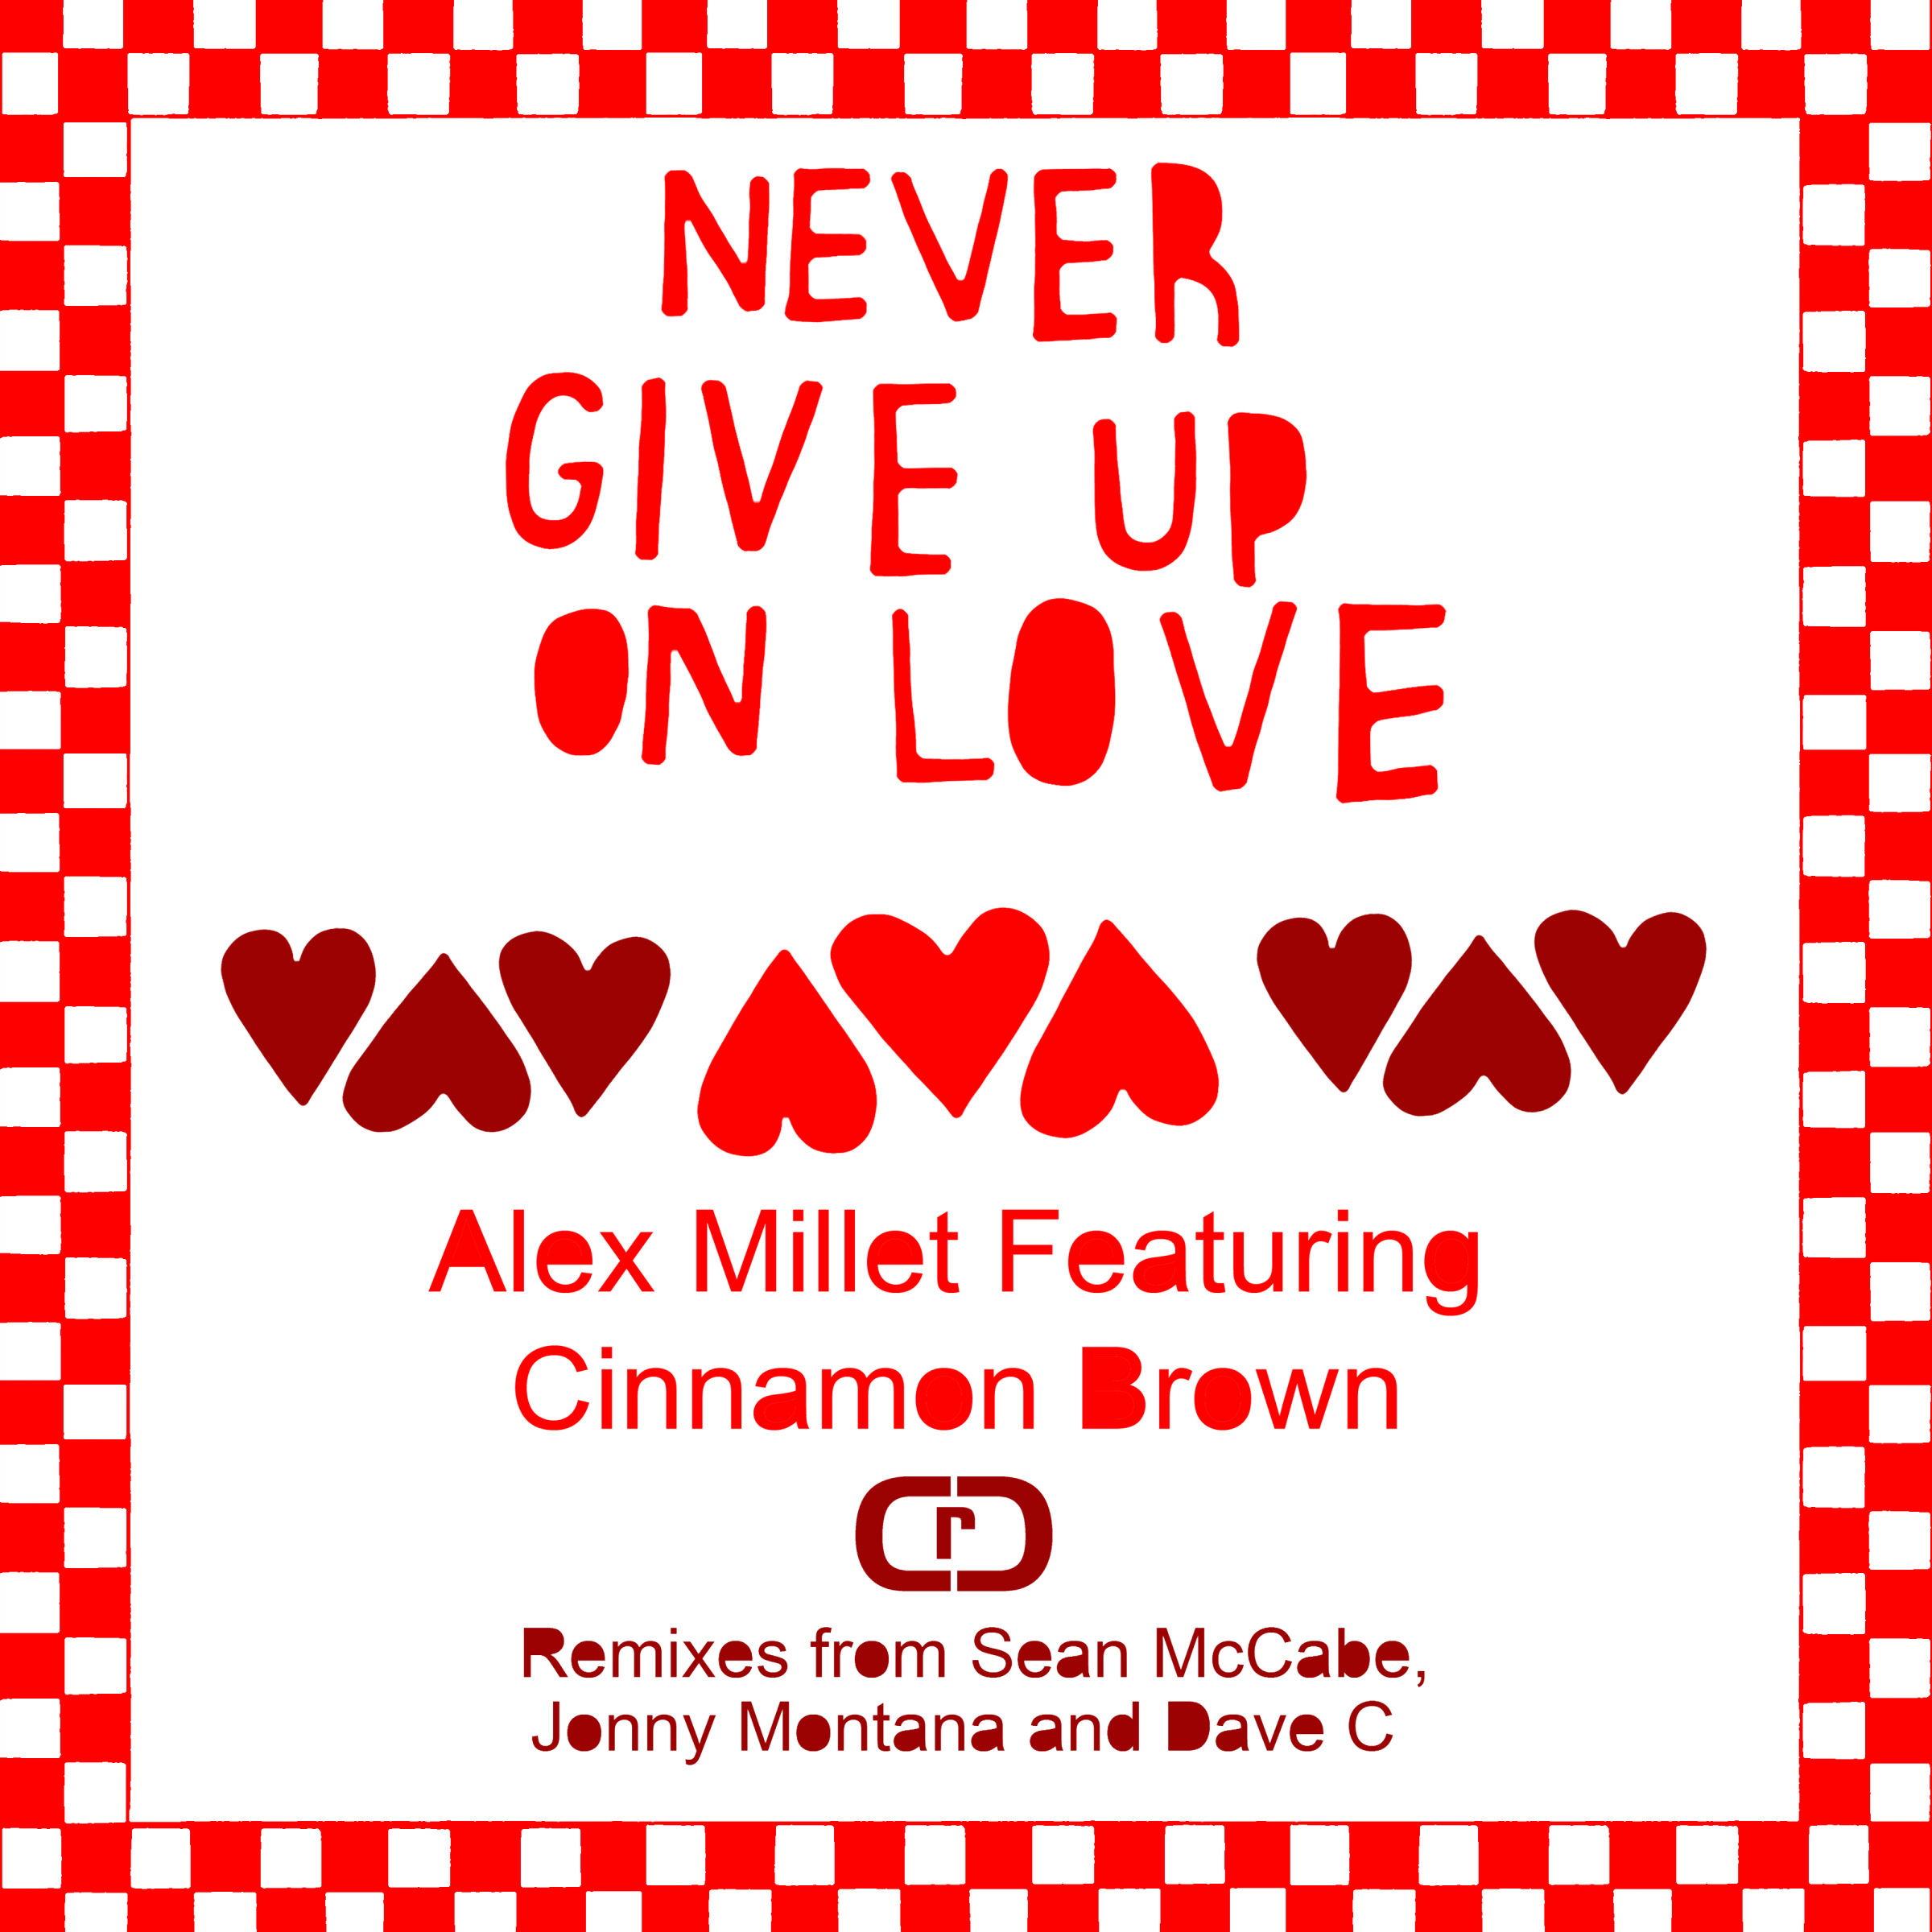 Alex Love. Never give up песня. Give Love give. Give up on Love. Алекс лове